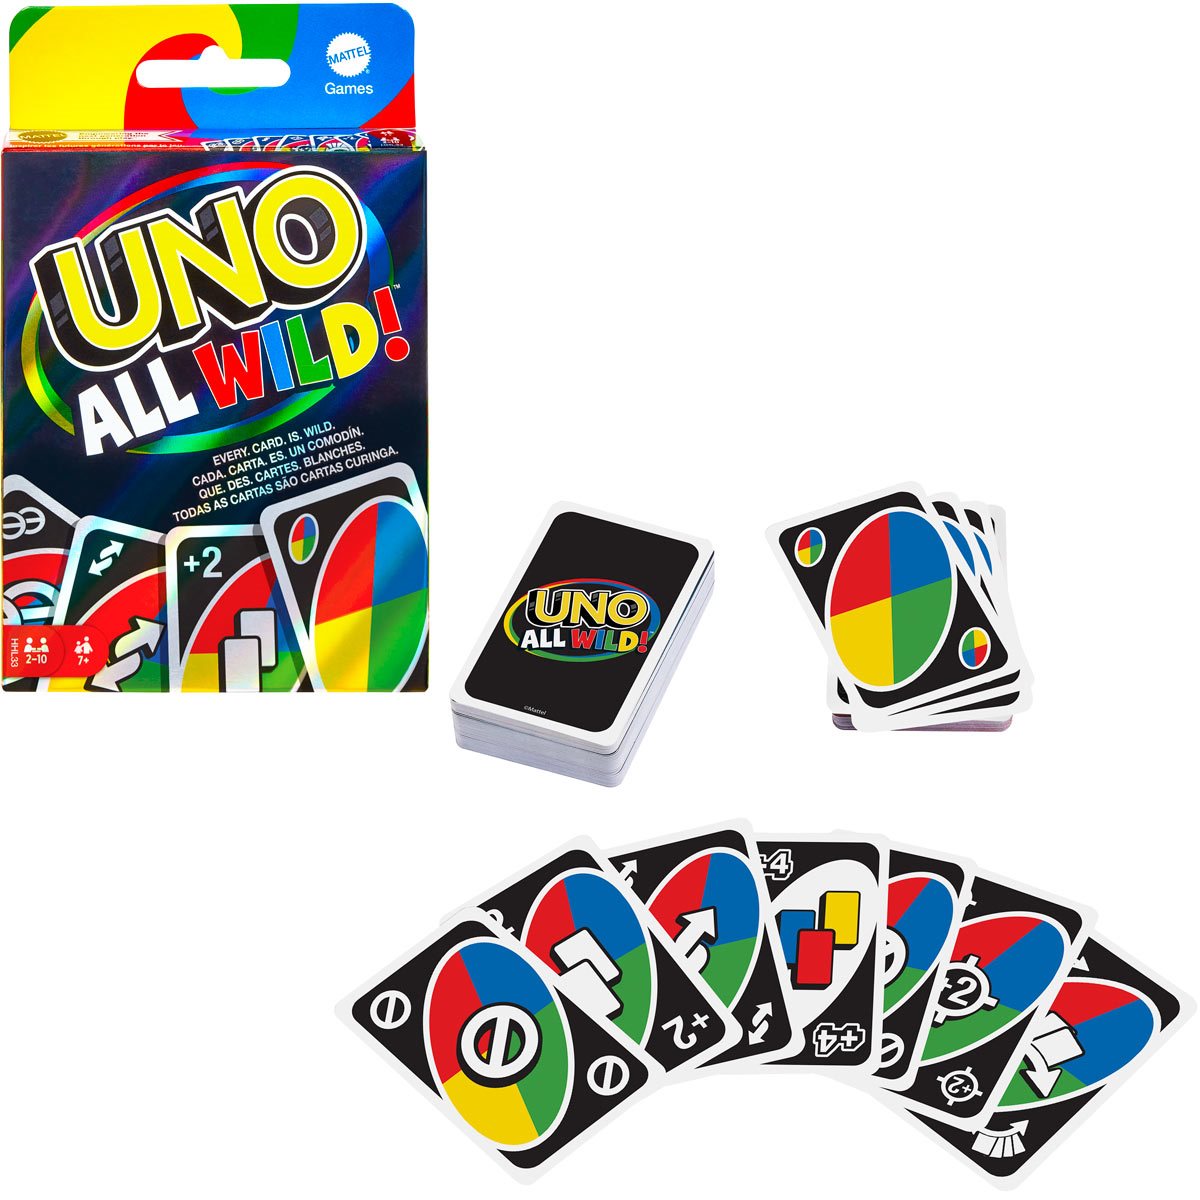 UNO All Wild Card Game - Entertainment Earth